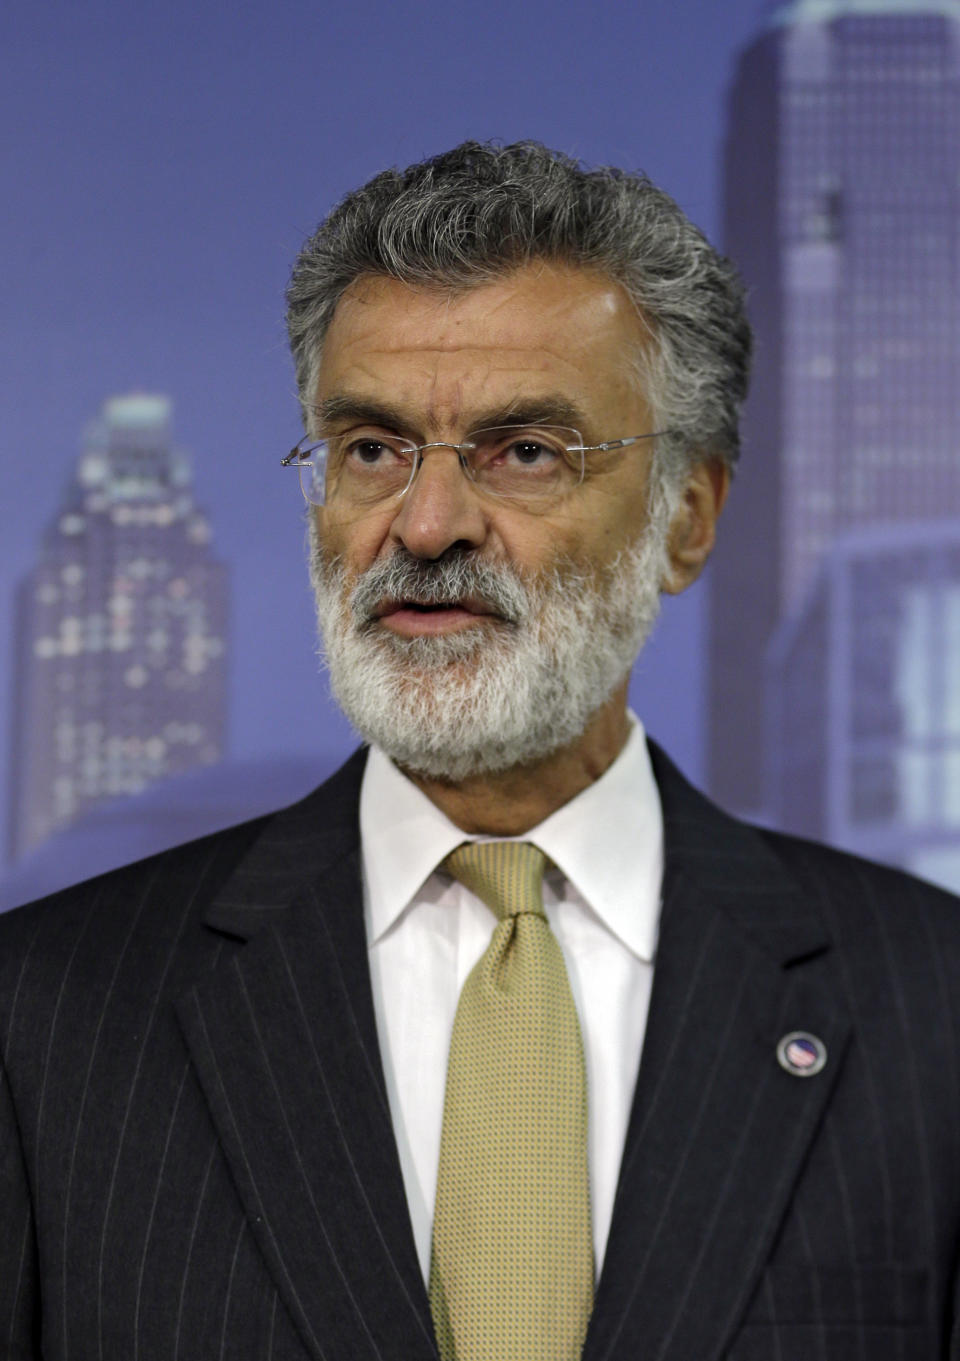 FILE-In this Oct. 15, 2013 file photo, Cleveland Mayor Frank Jackson speaks during a briefing in Cleveland. Having fallen short twice recently, Ohio is making a big push to land the 2016 Republican National Convention with three cities bidding as finalists, eager to reassert its Midwestern political clout to a party that may be slowly moving away from it. The three cities, Cincinnati, Cleveland and Columbus, are among eight initial finalists for the GOP convention, the most from Ohio in a single year in recent memory. (AP Photo/Tony Dejak, File)